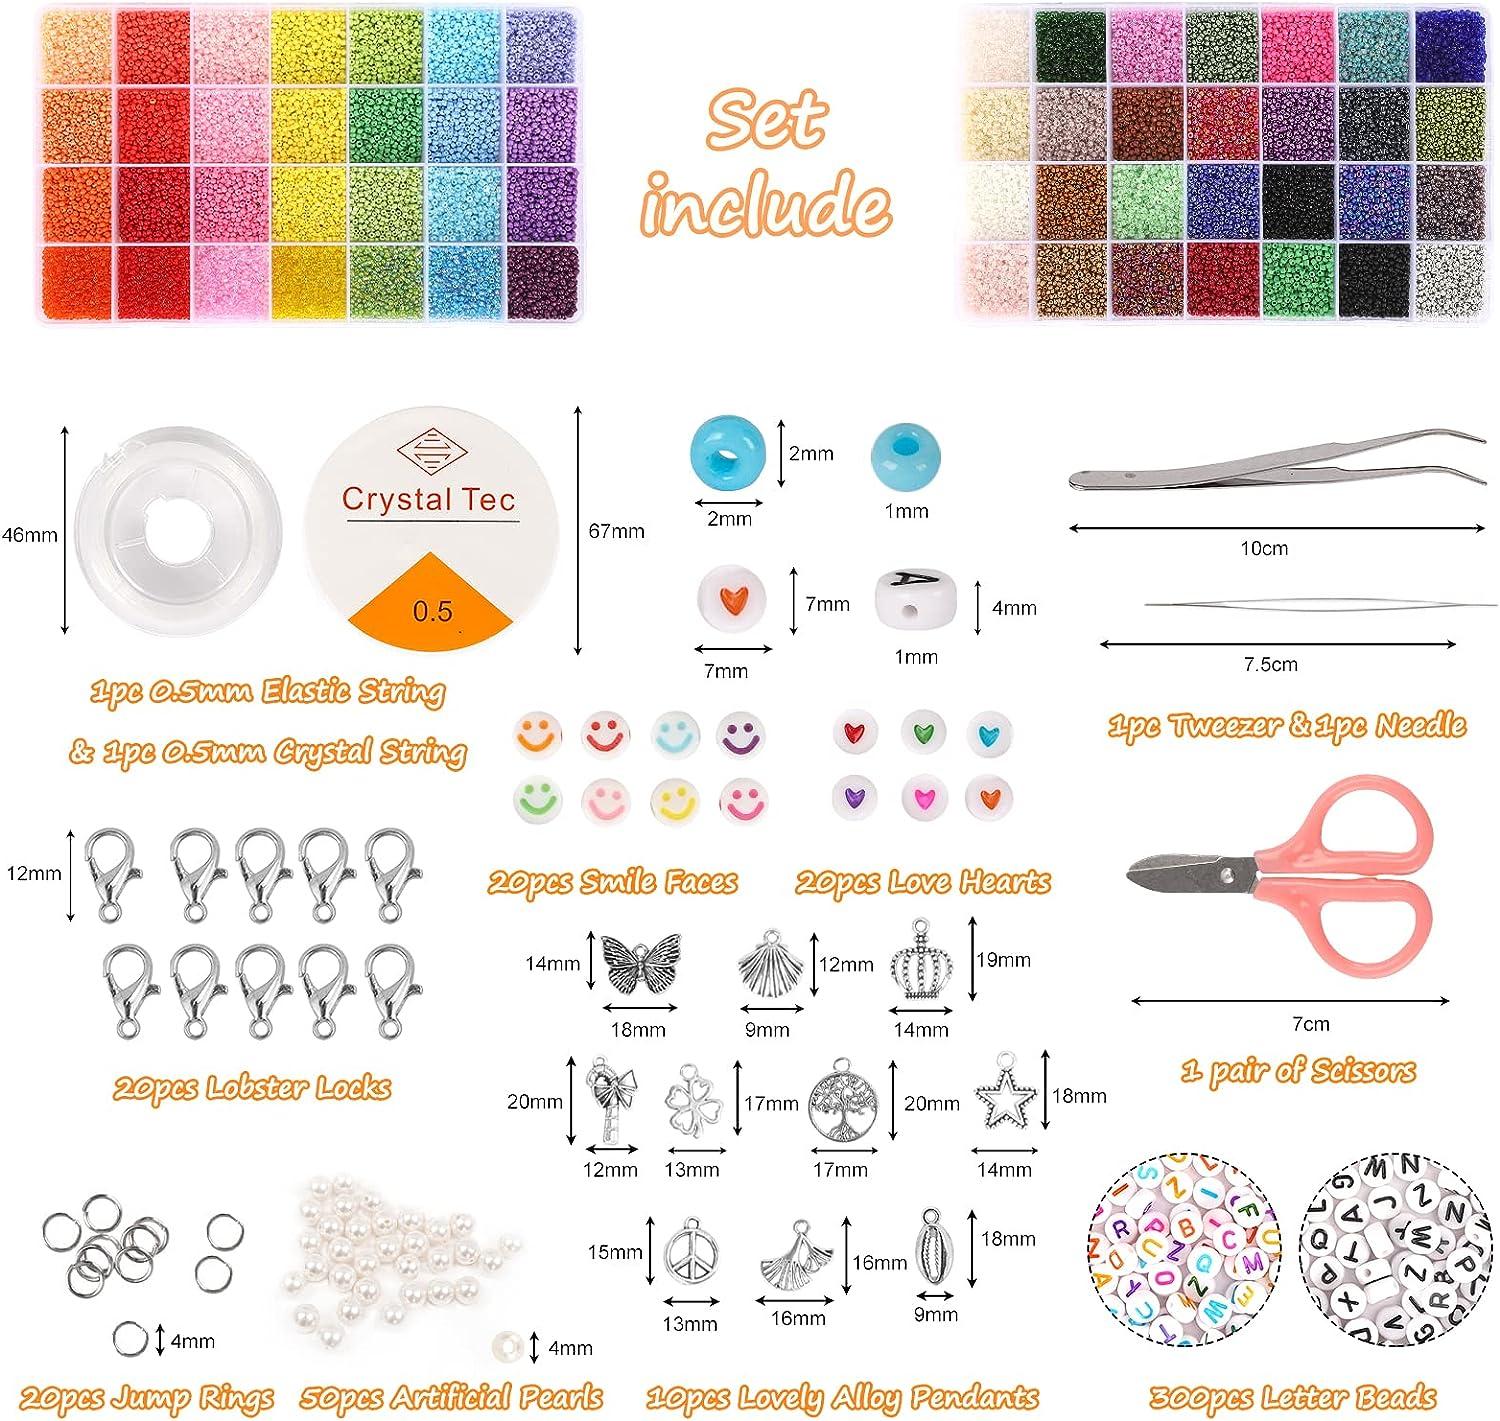 QUEFE 4320pcs 72 Colors, 5mm Glass Seed Beads for Bracelet Making Kit,  Small Beads for Jewelry Making with Letter Beads for Crafts Gifts